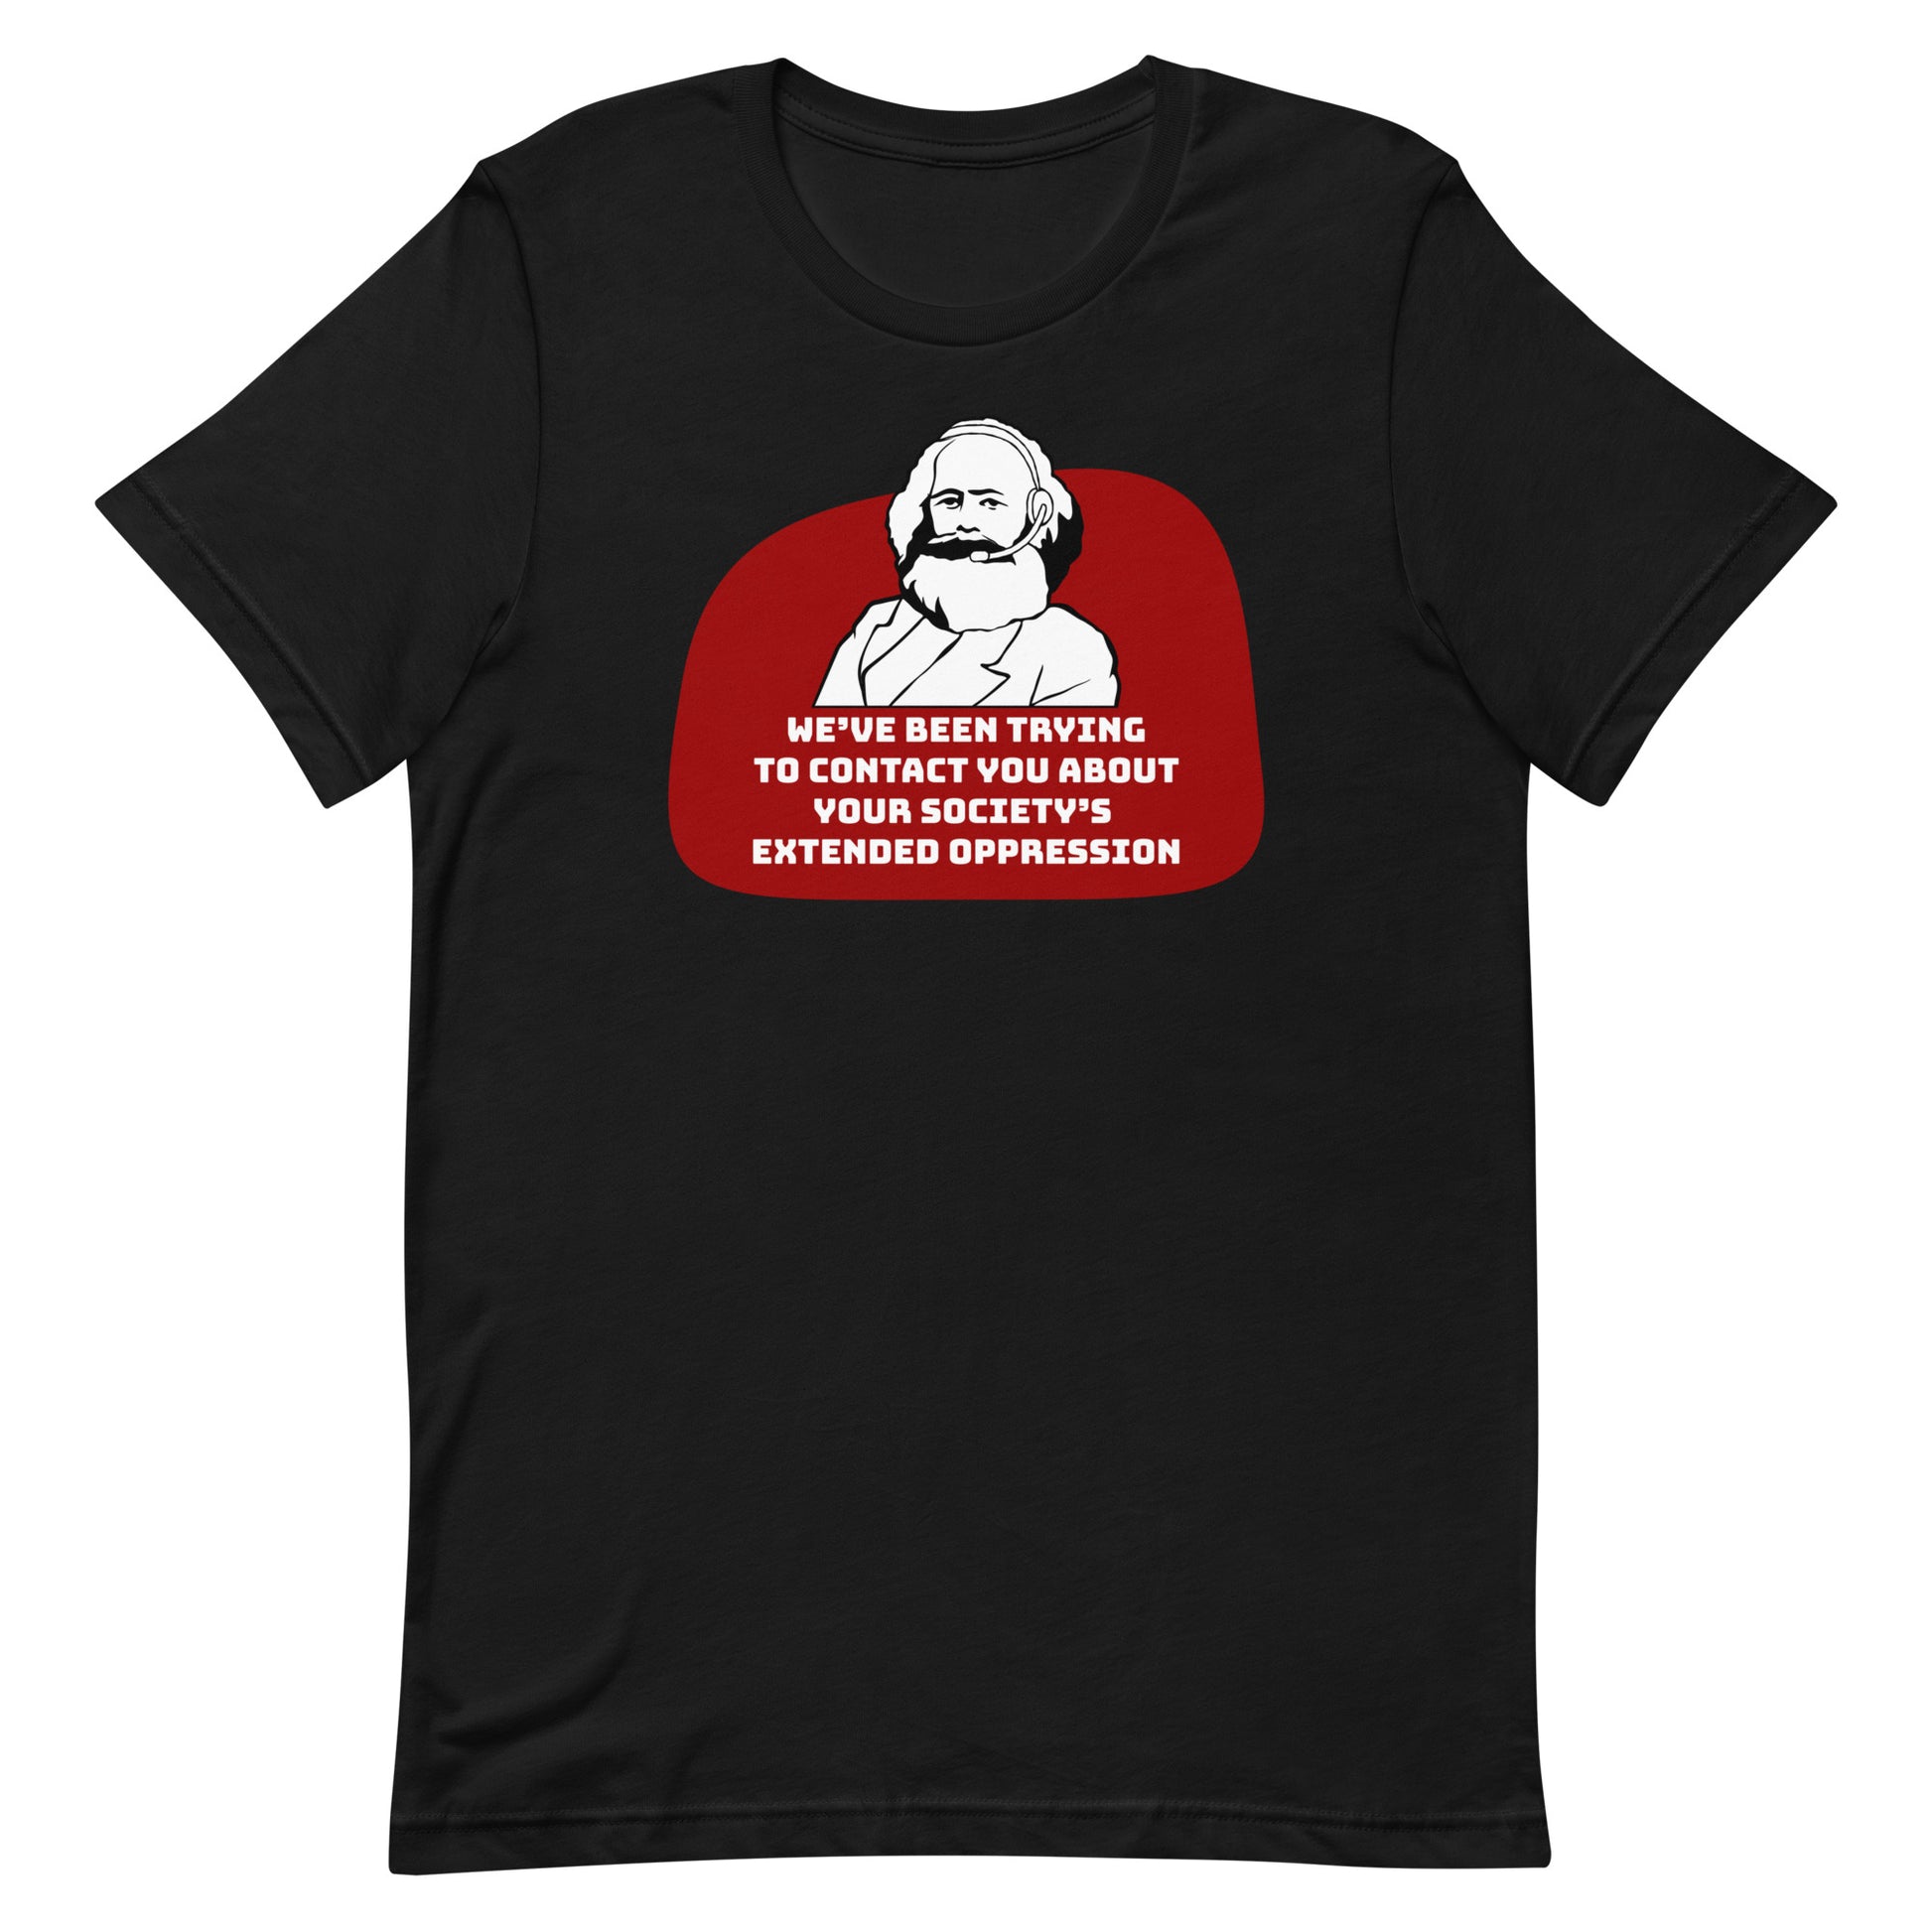 A black crewneck t-shirt featuring a black and white illustration of Karl Marx wearing a telemarketer headset. Text beneath Marx reads "We've been trying to contact you about your society's extended oppression." in a blocky font.